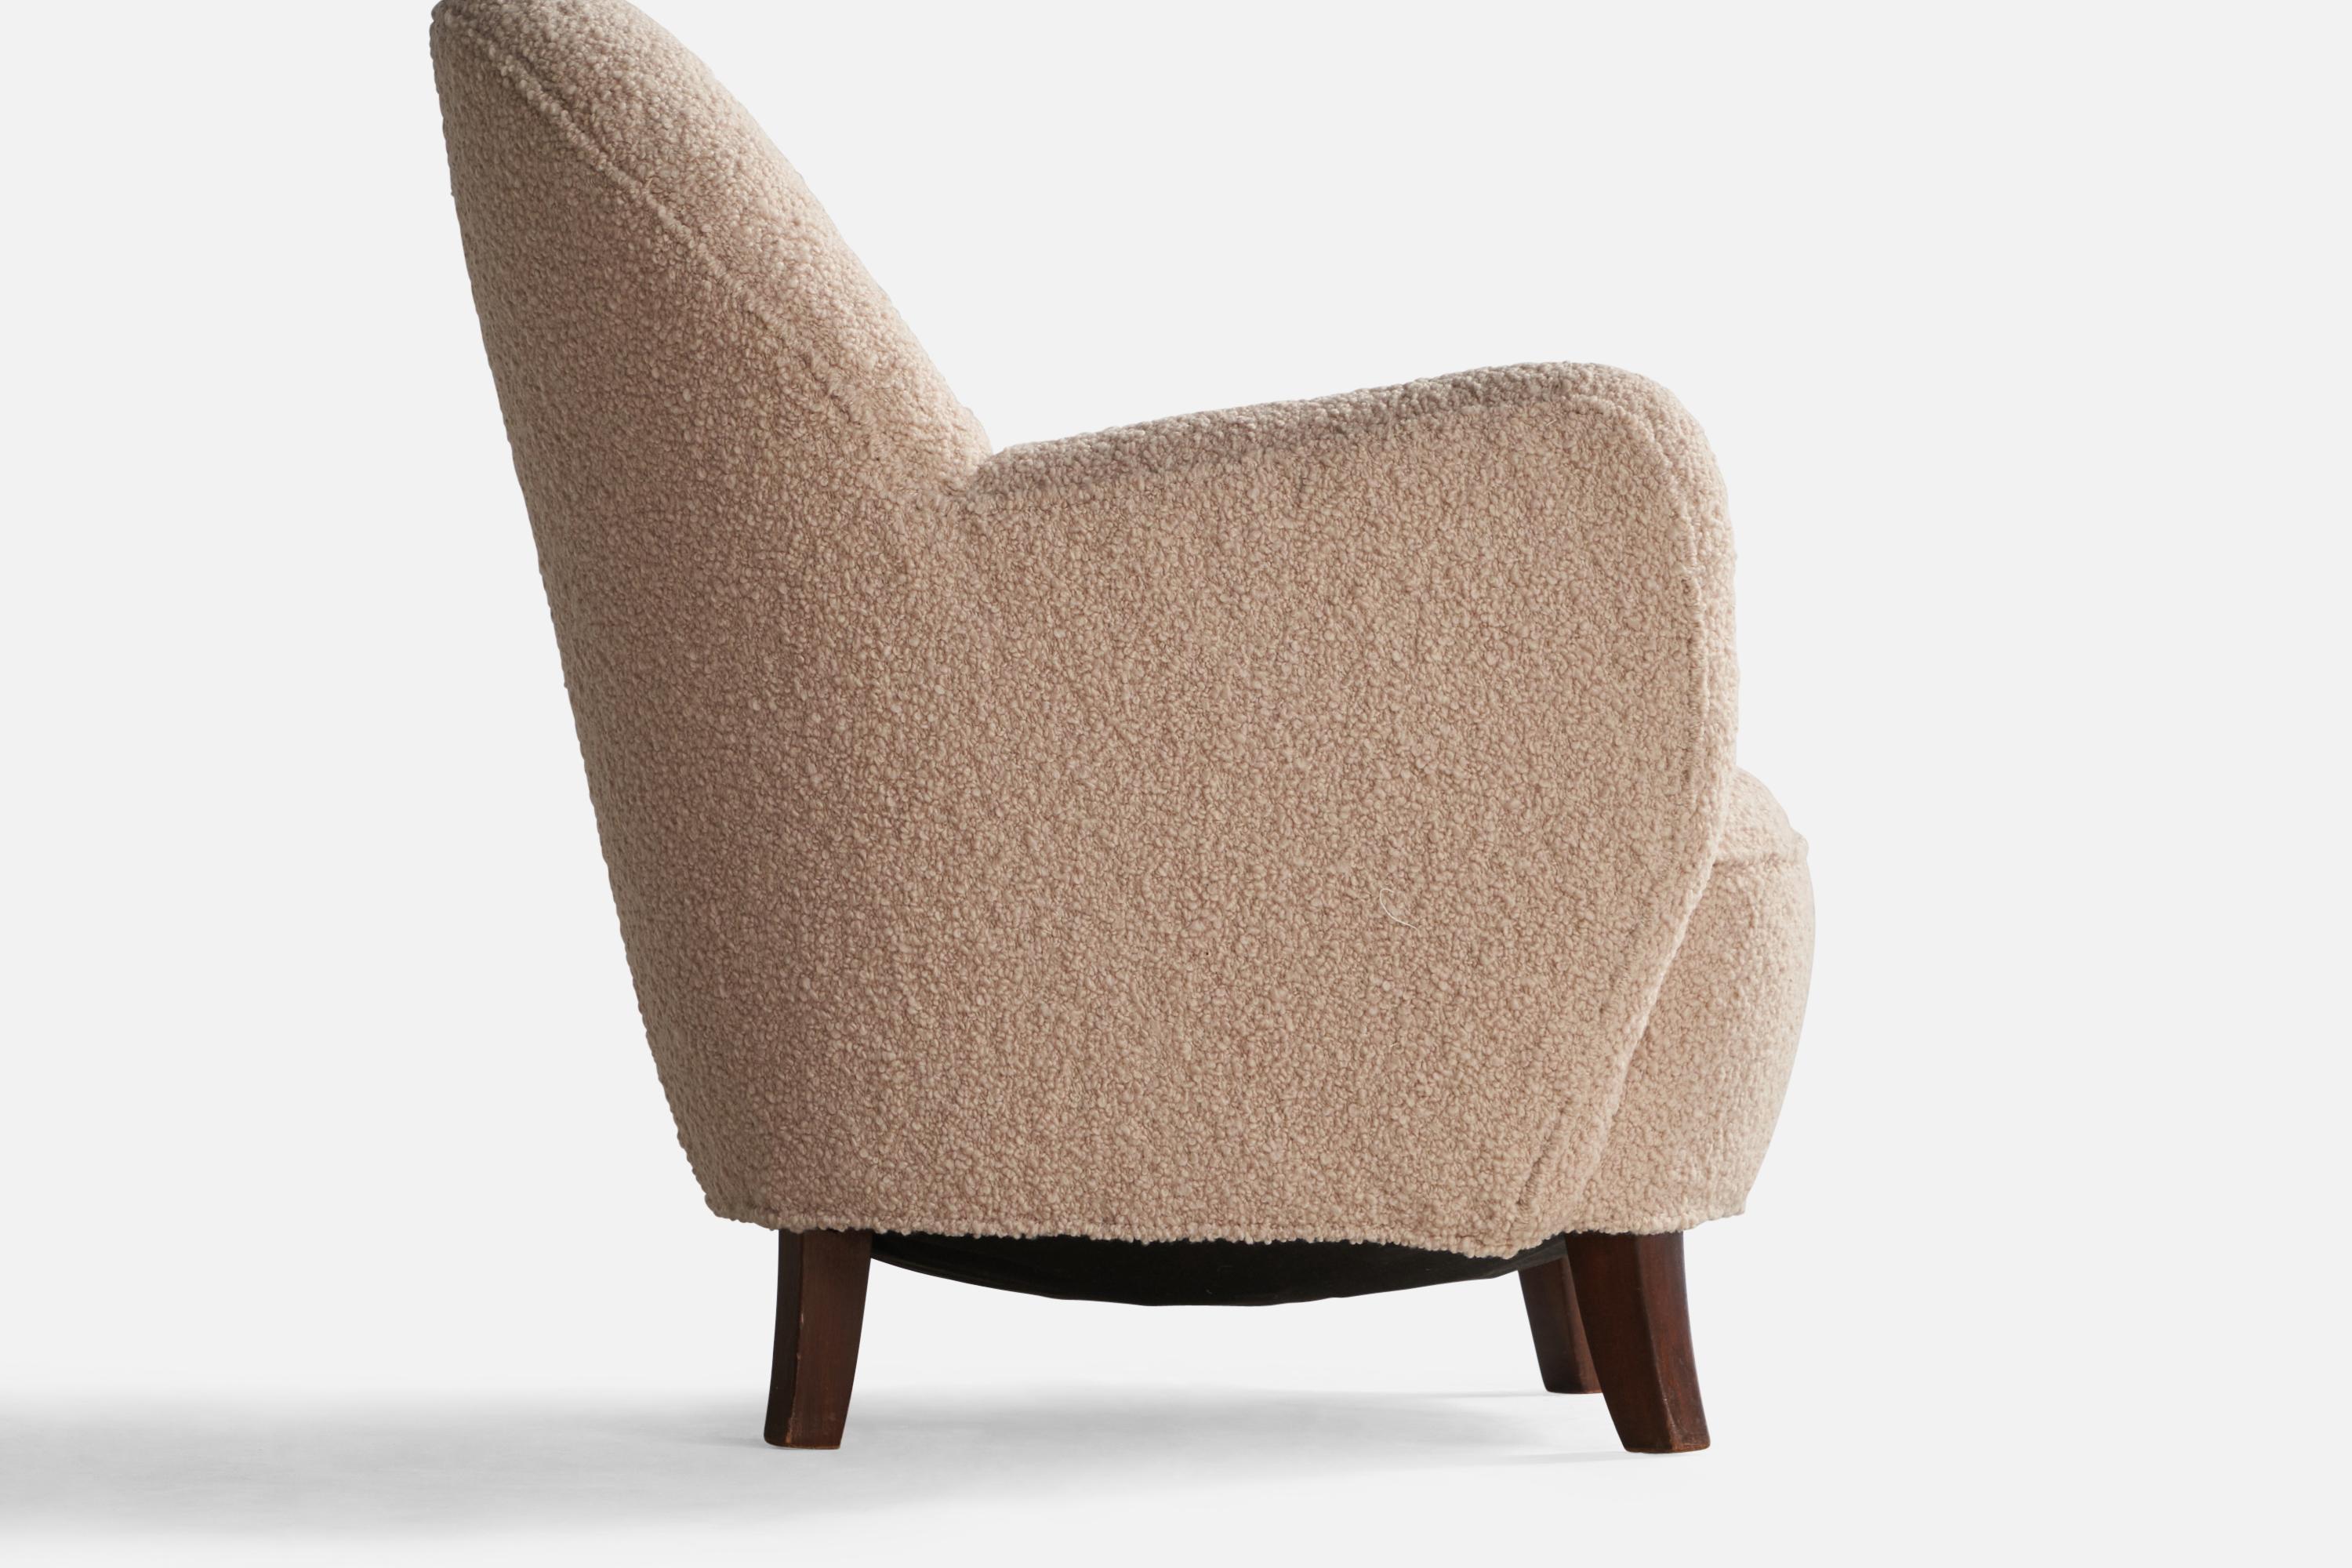 Mid-20th Century George Kofoed, Lounge Chair, Fabric, Wood, Denmark, 1940s For Sale